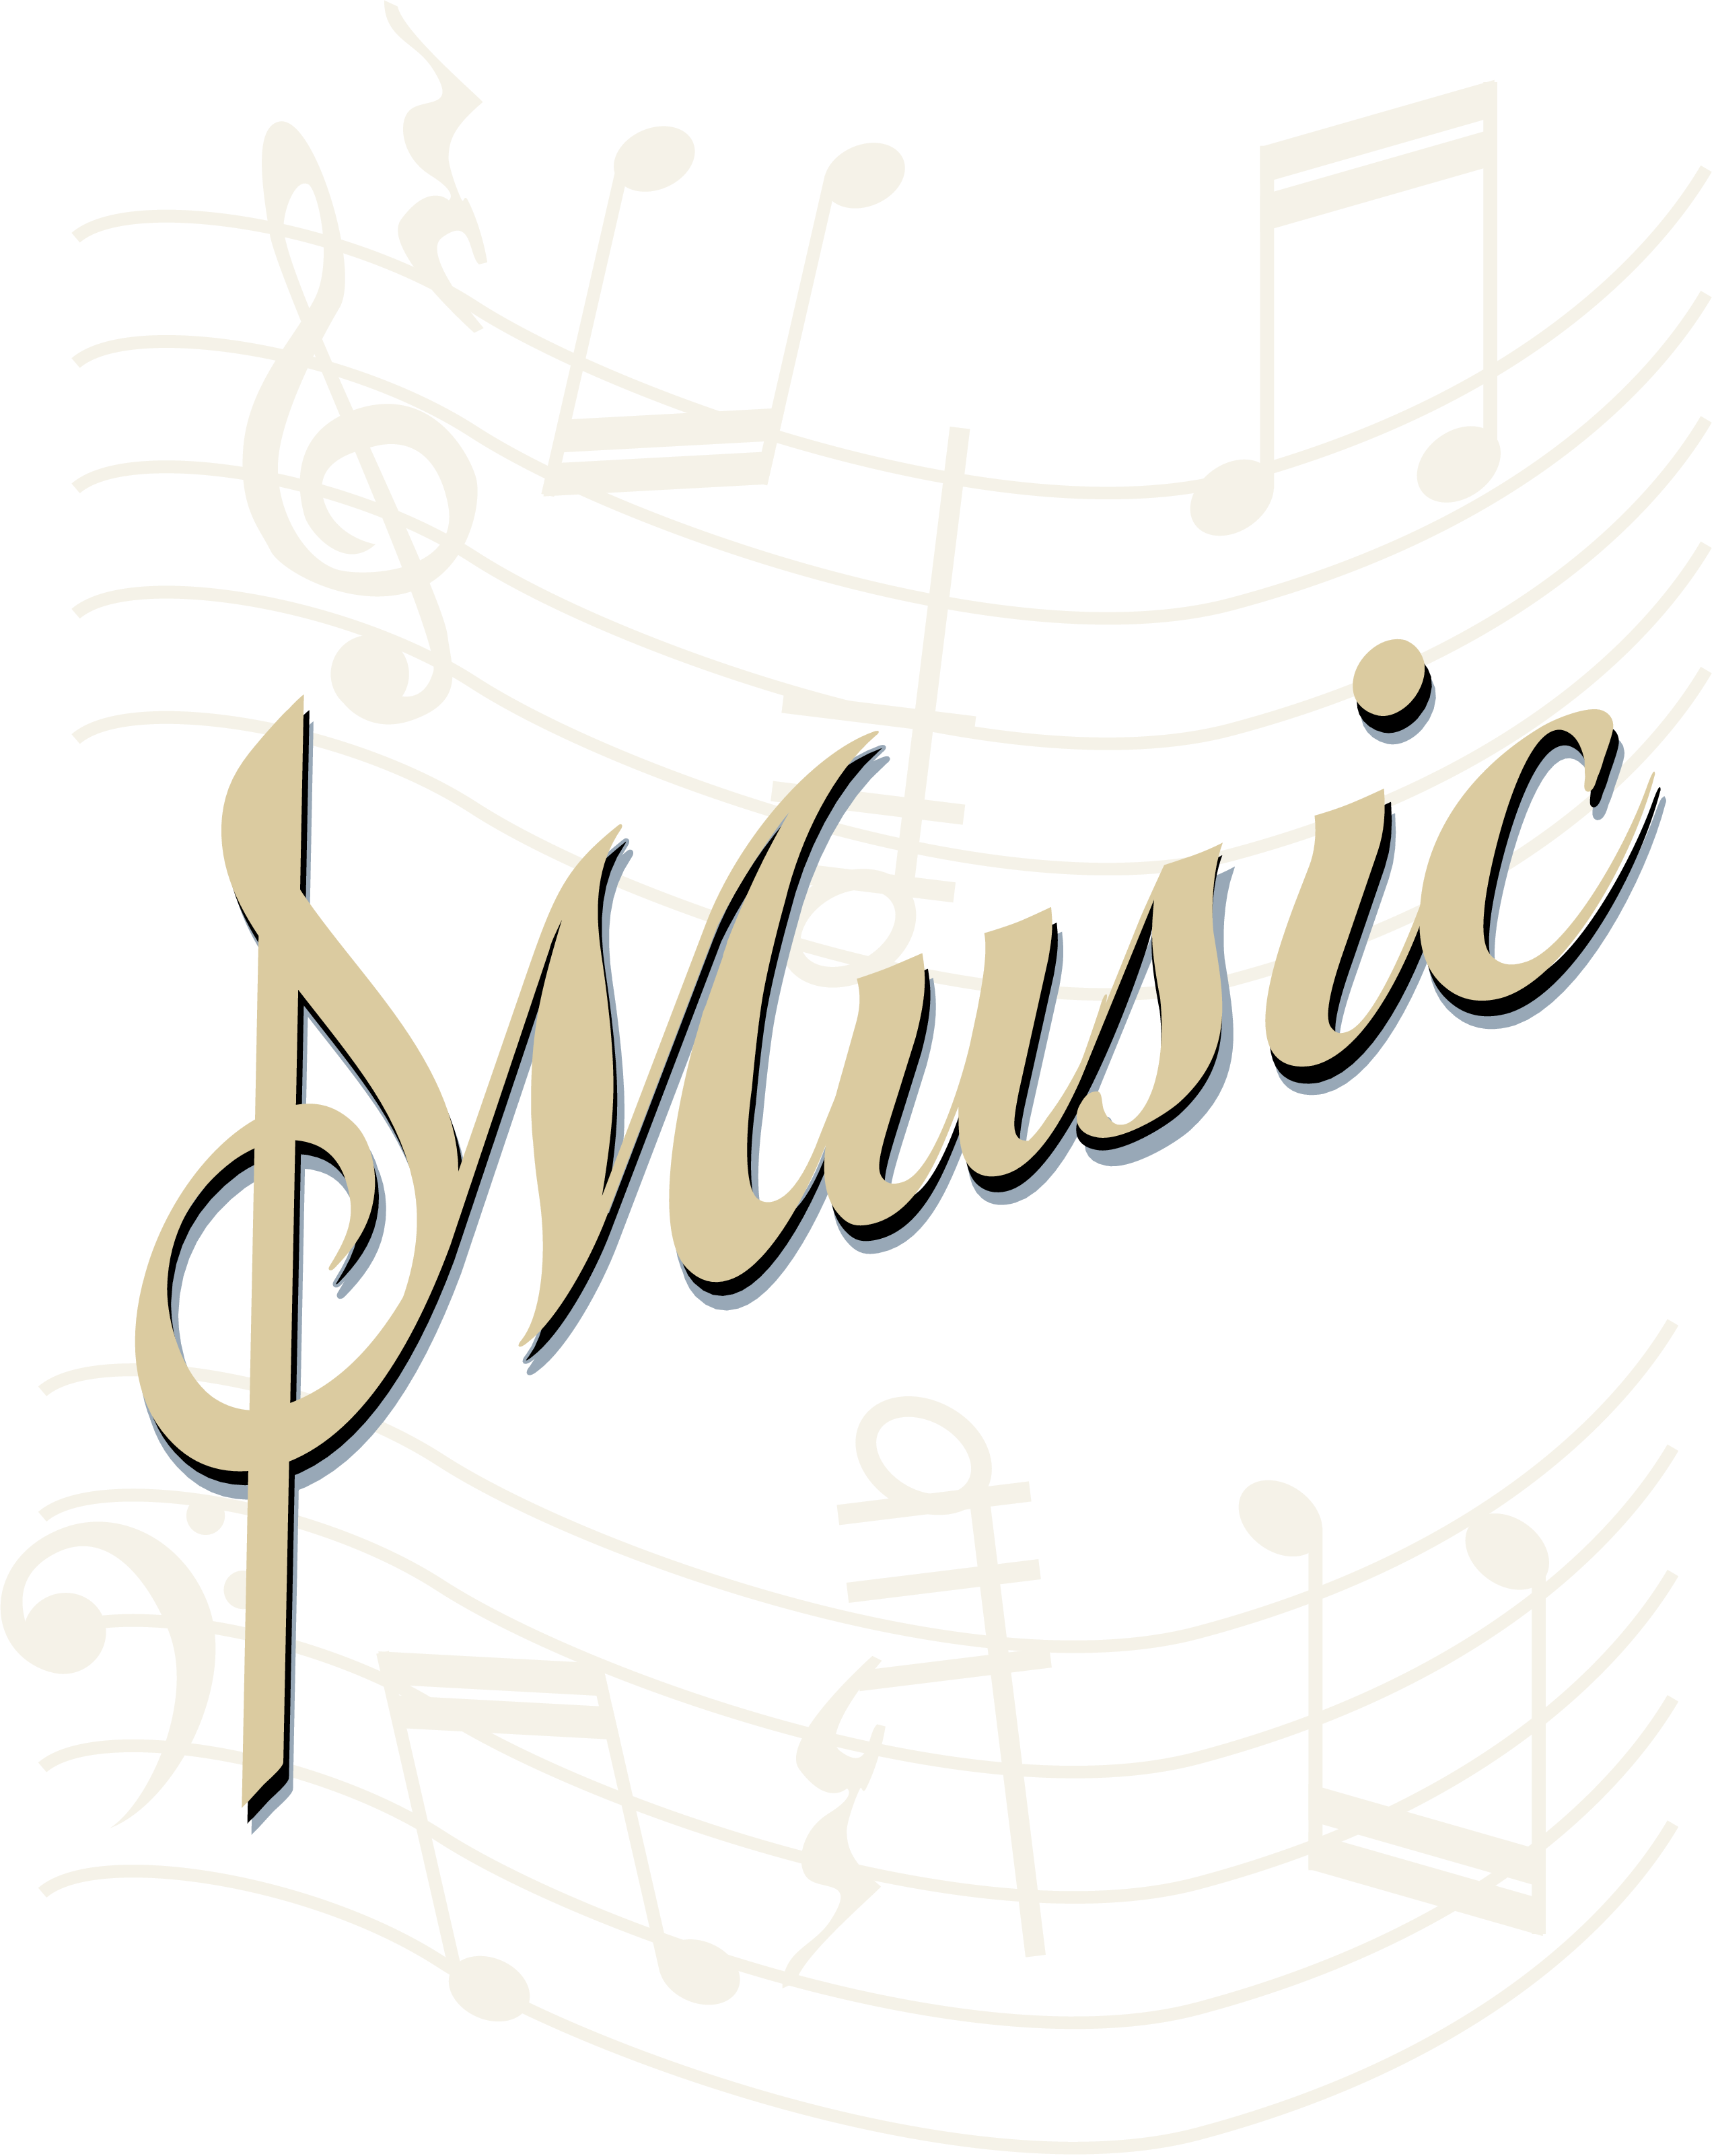 music clipart for word - photo #12